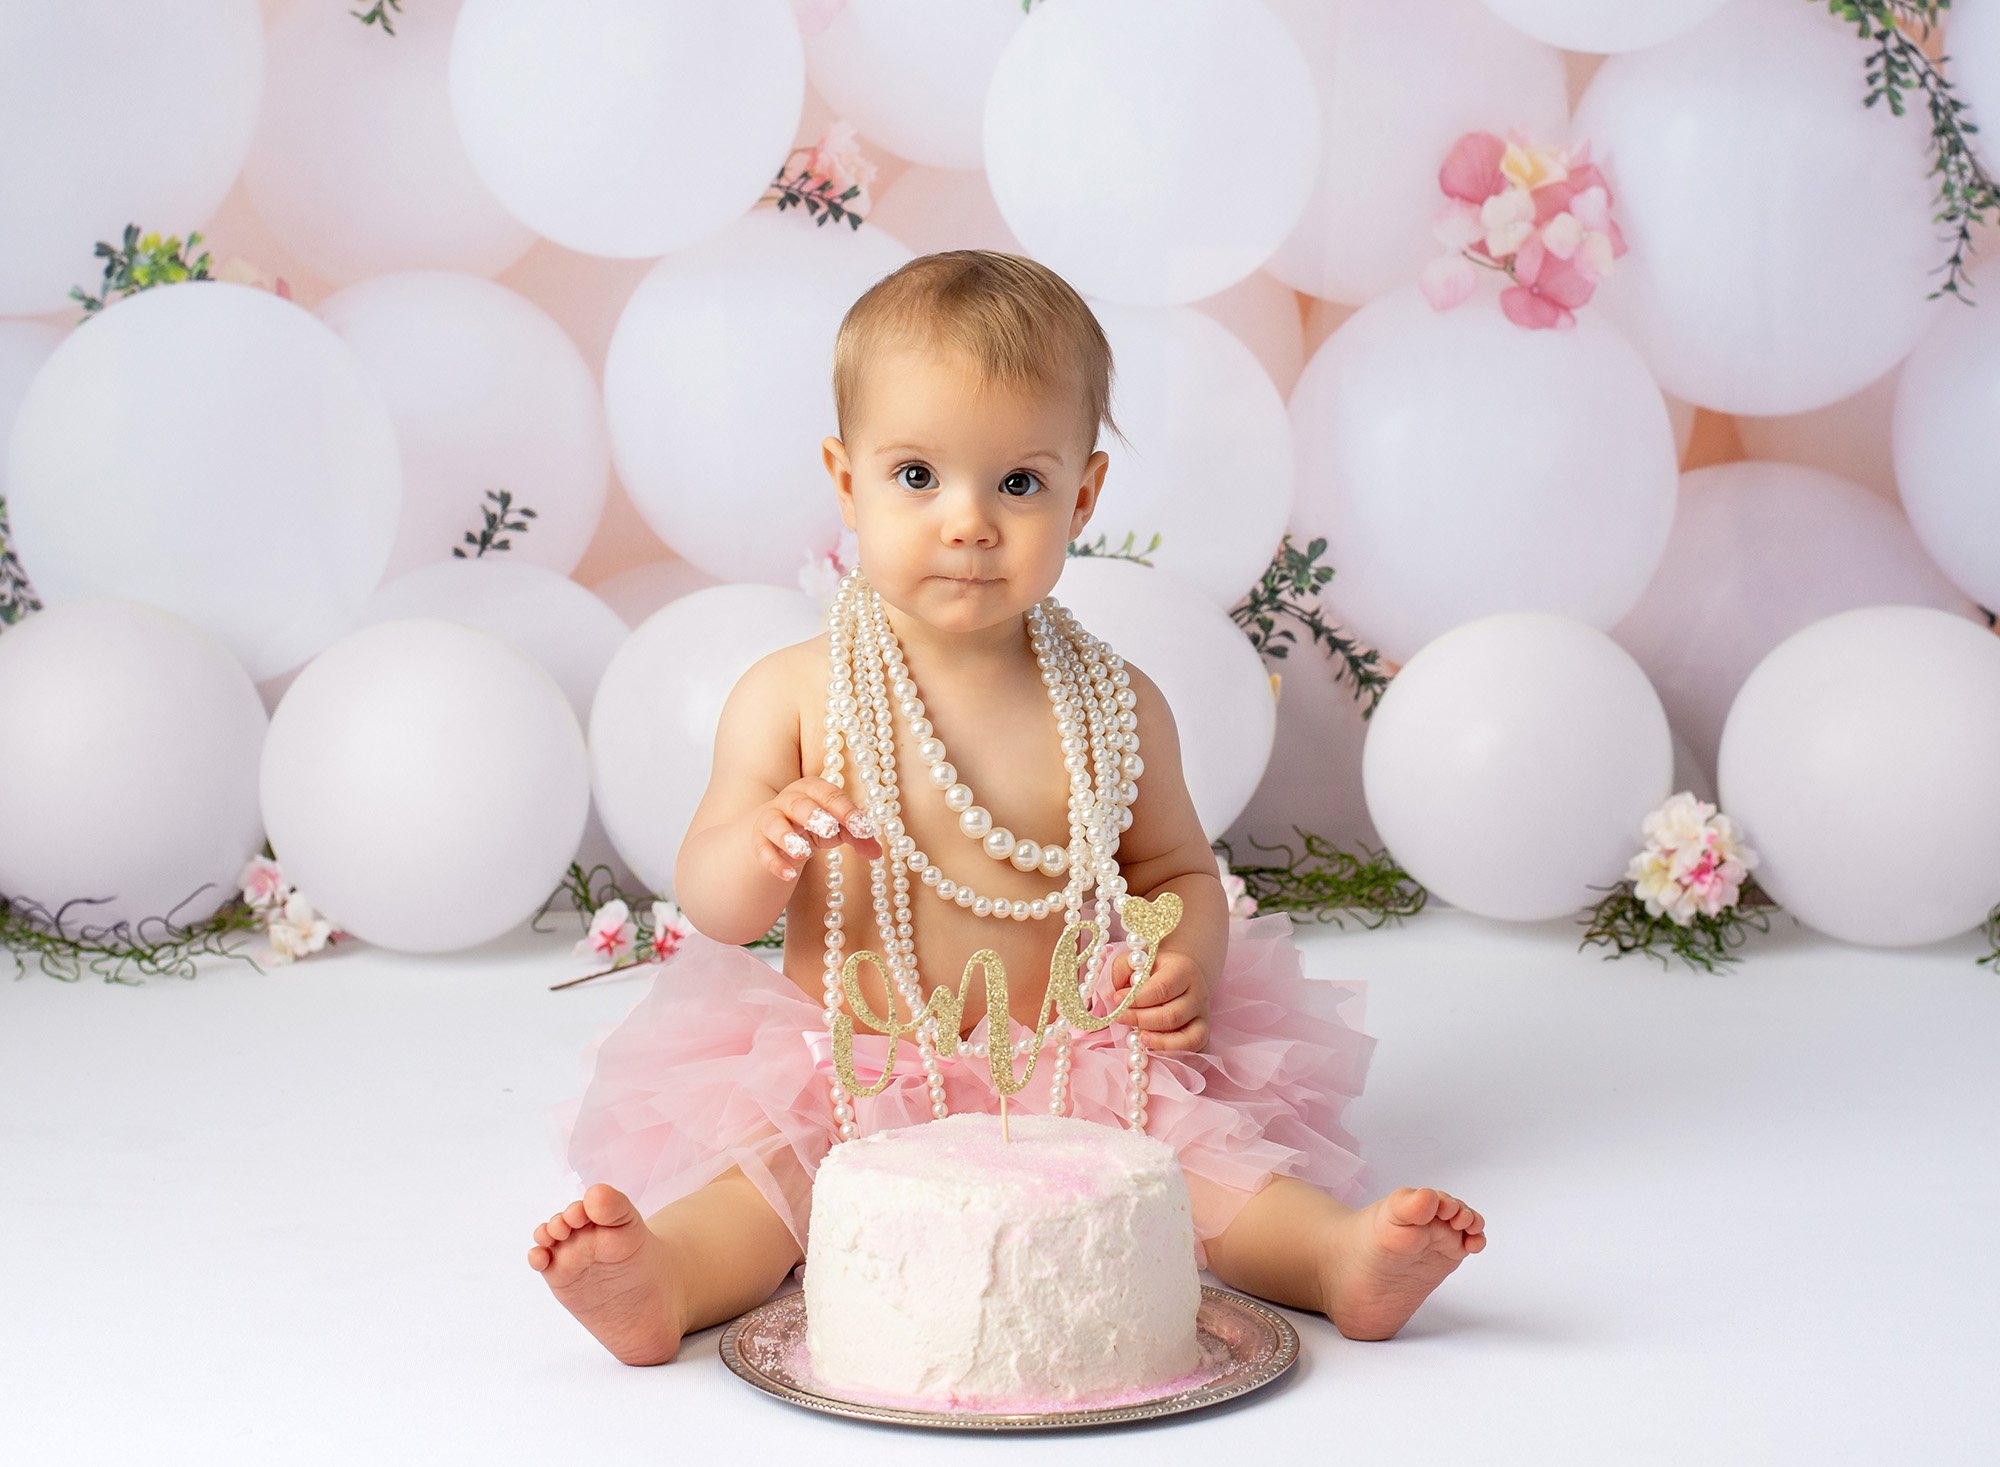 baby girl wearing layered pearl necklace and pink tutu sitting in front of cake with gold glitter ONE sign with white balloons in background and frosting on fingers